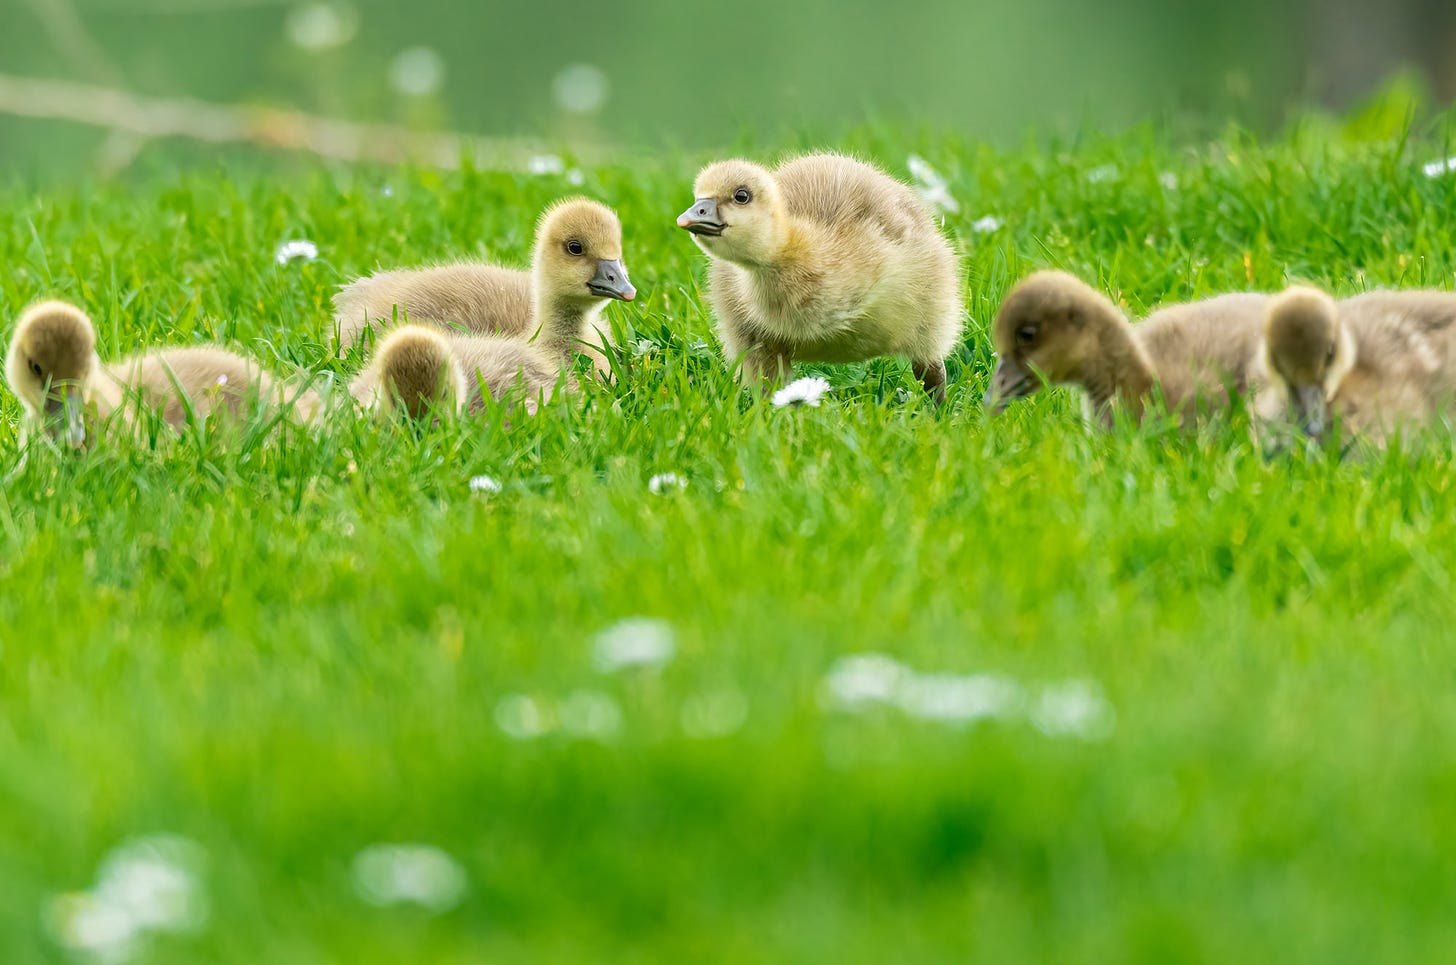 Greylag goslings grazing, photographed by Rhiannon Law